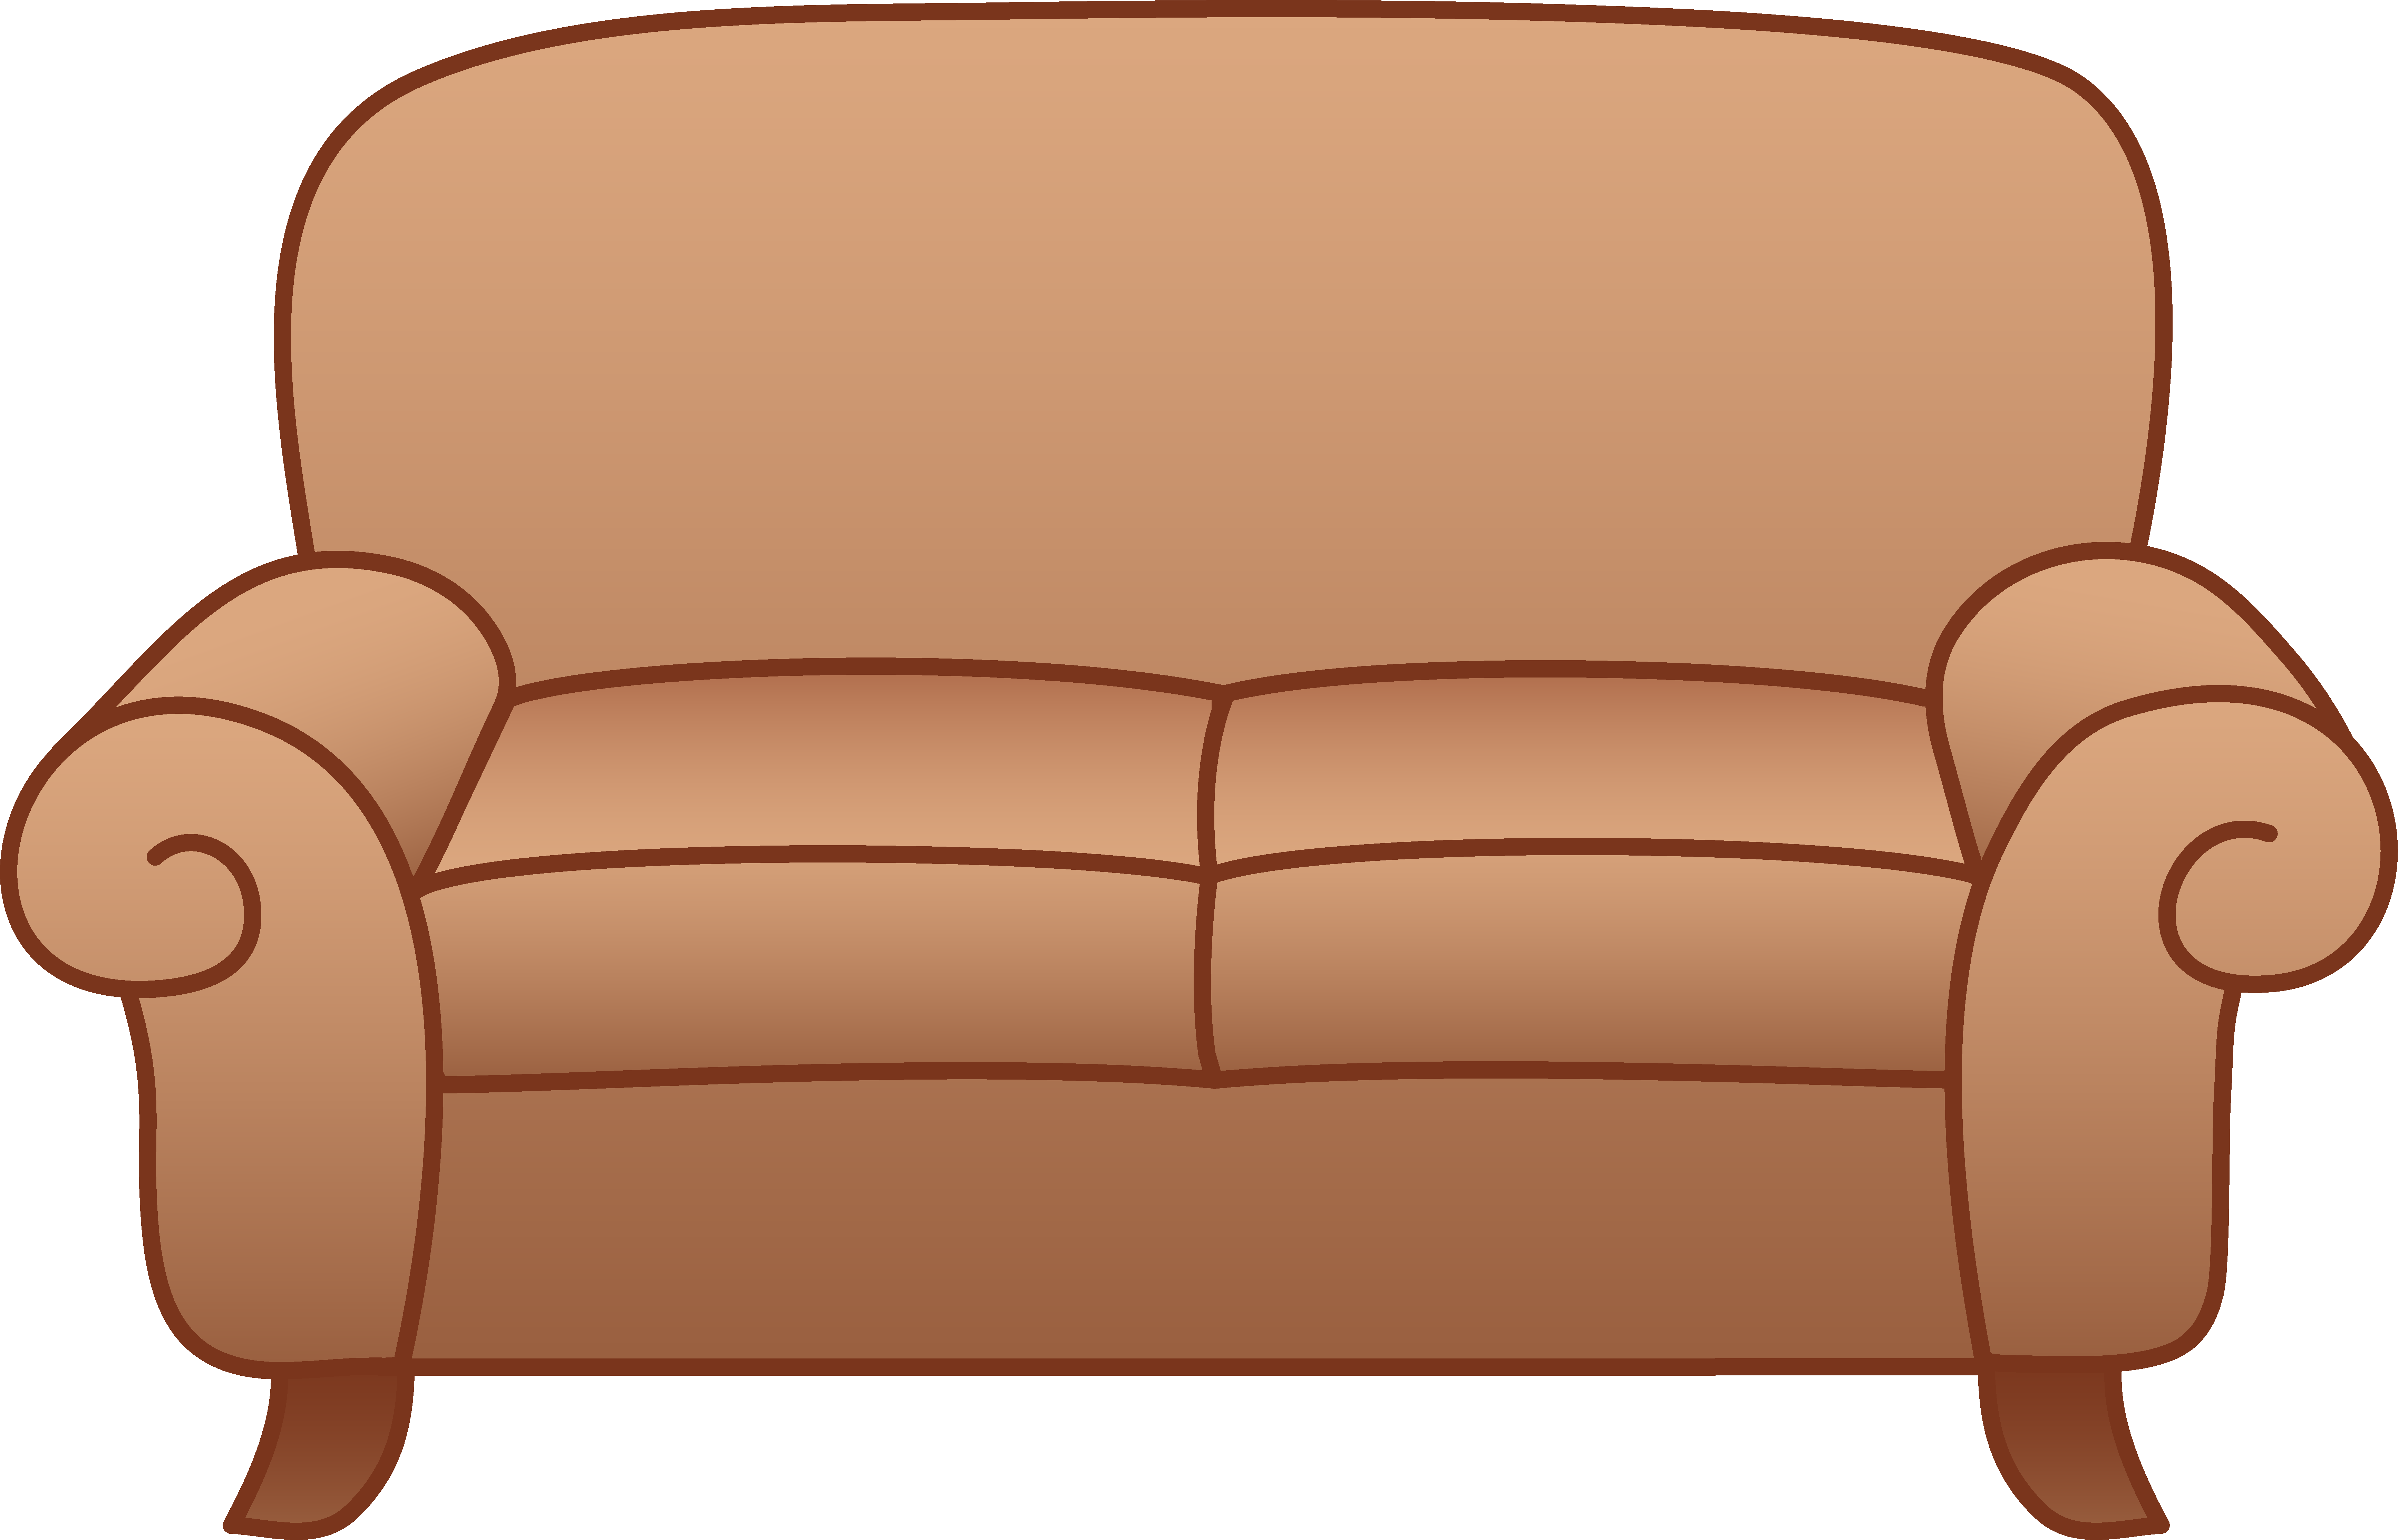 Living room furniture clipart